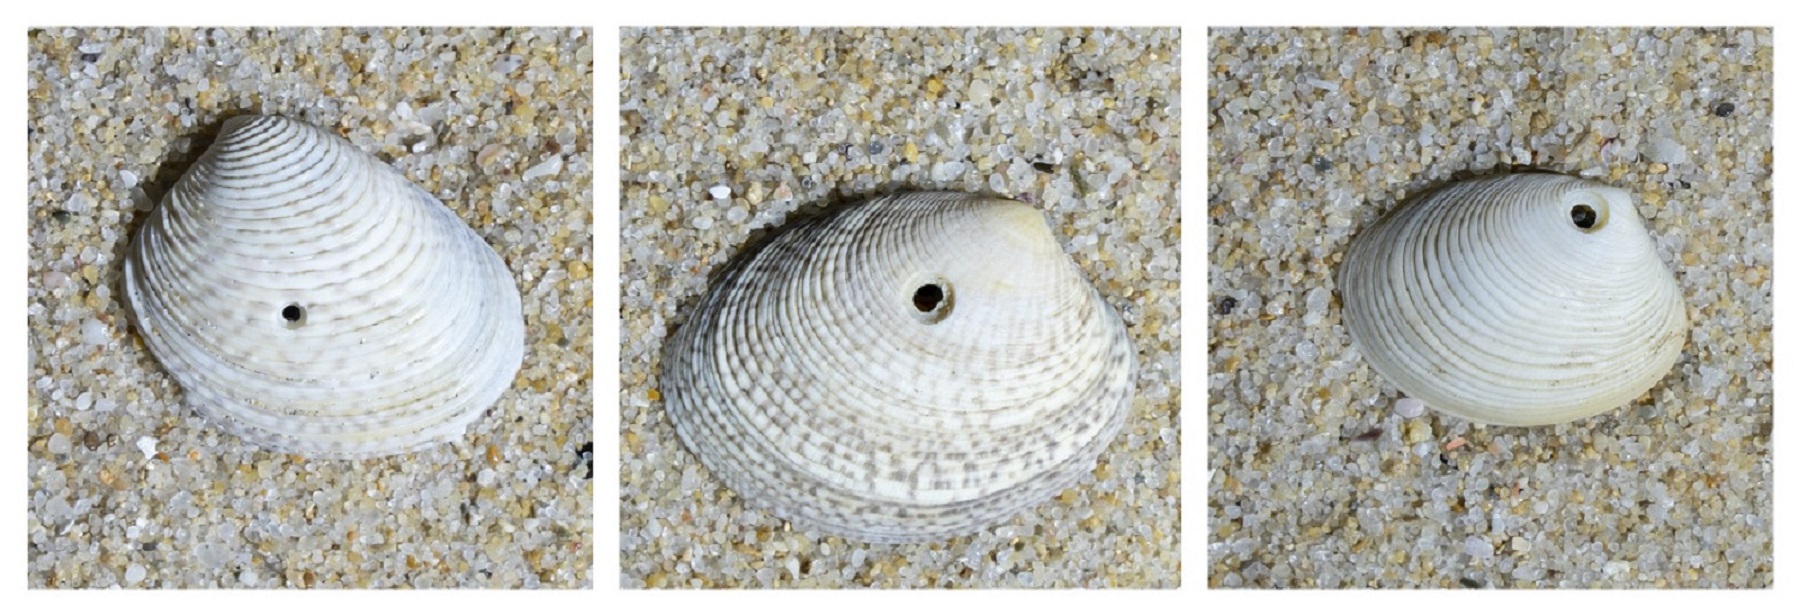 Weekly Creature Feature: How did these shells get such perfect holes?